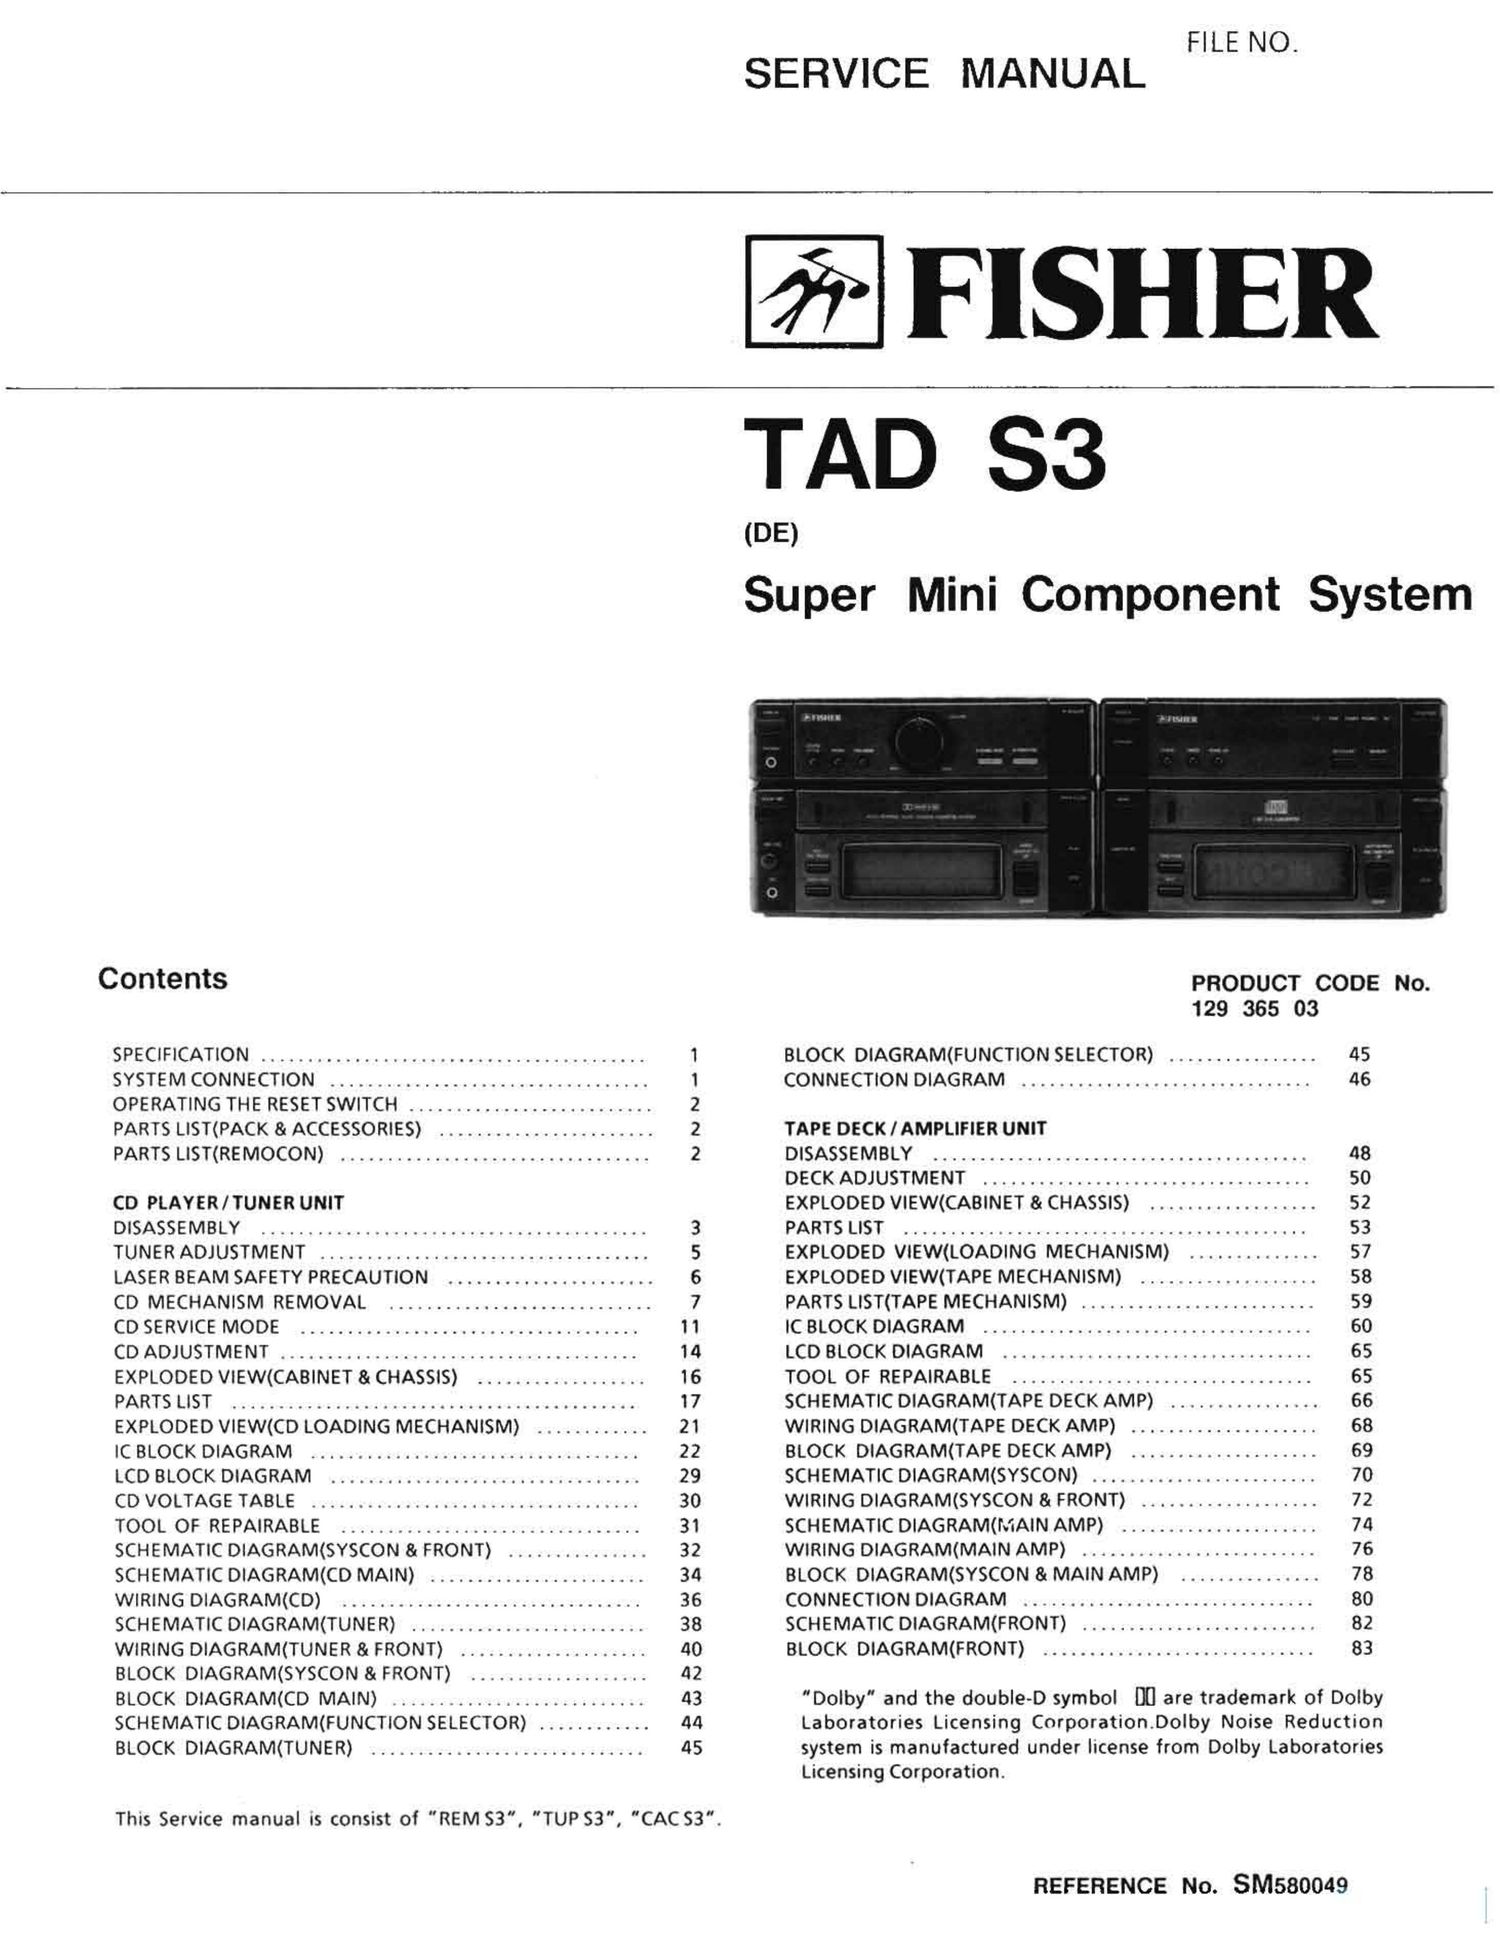 Fisher TAD S3 Schematic